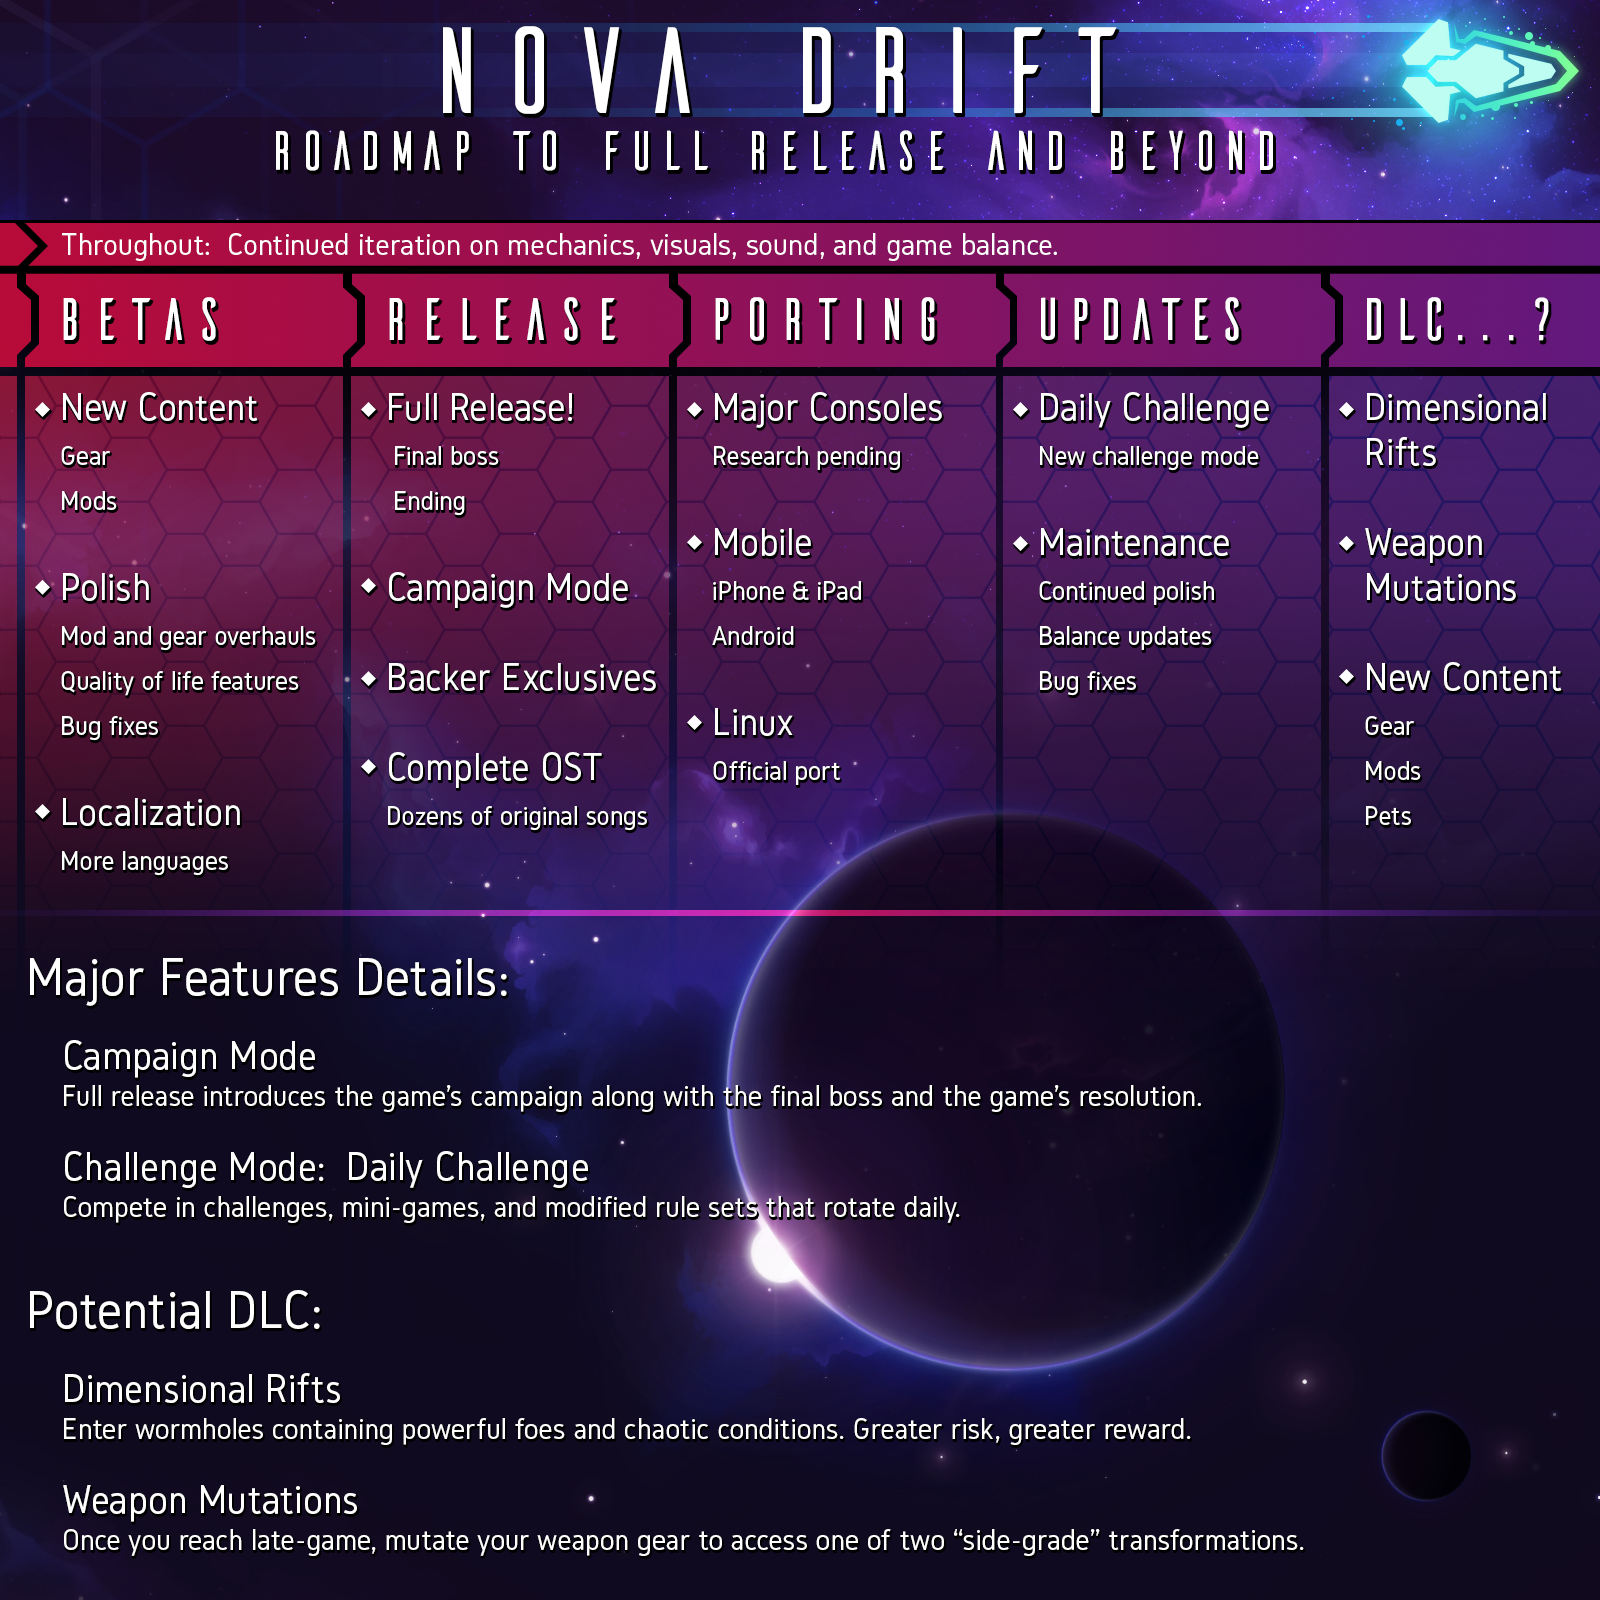 Nova Drift: Frequently Asked Questions